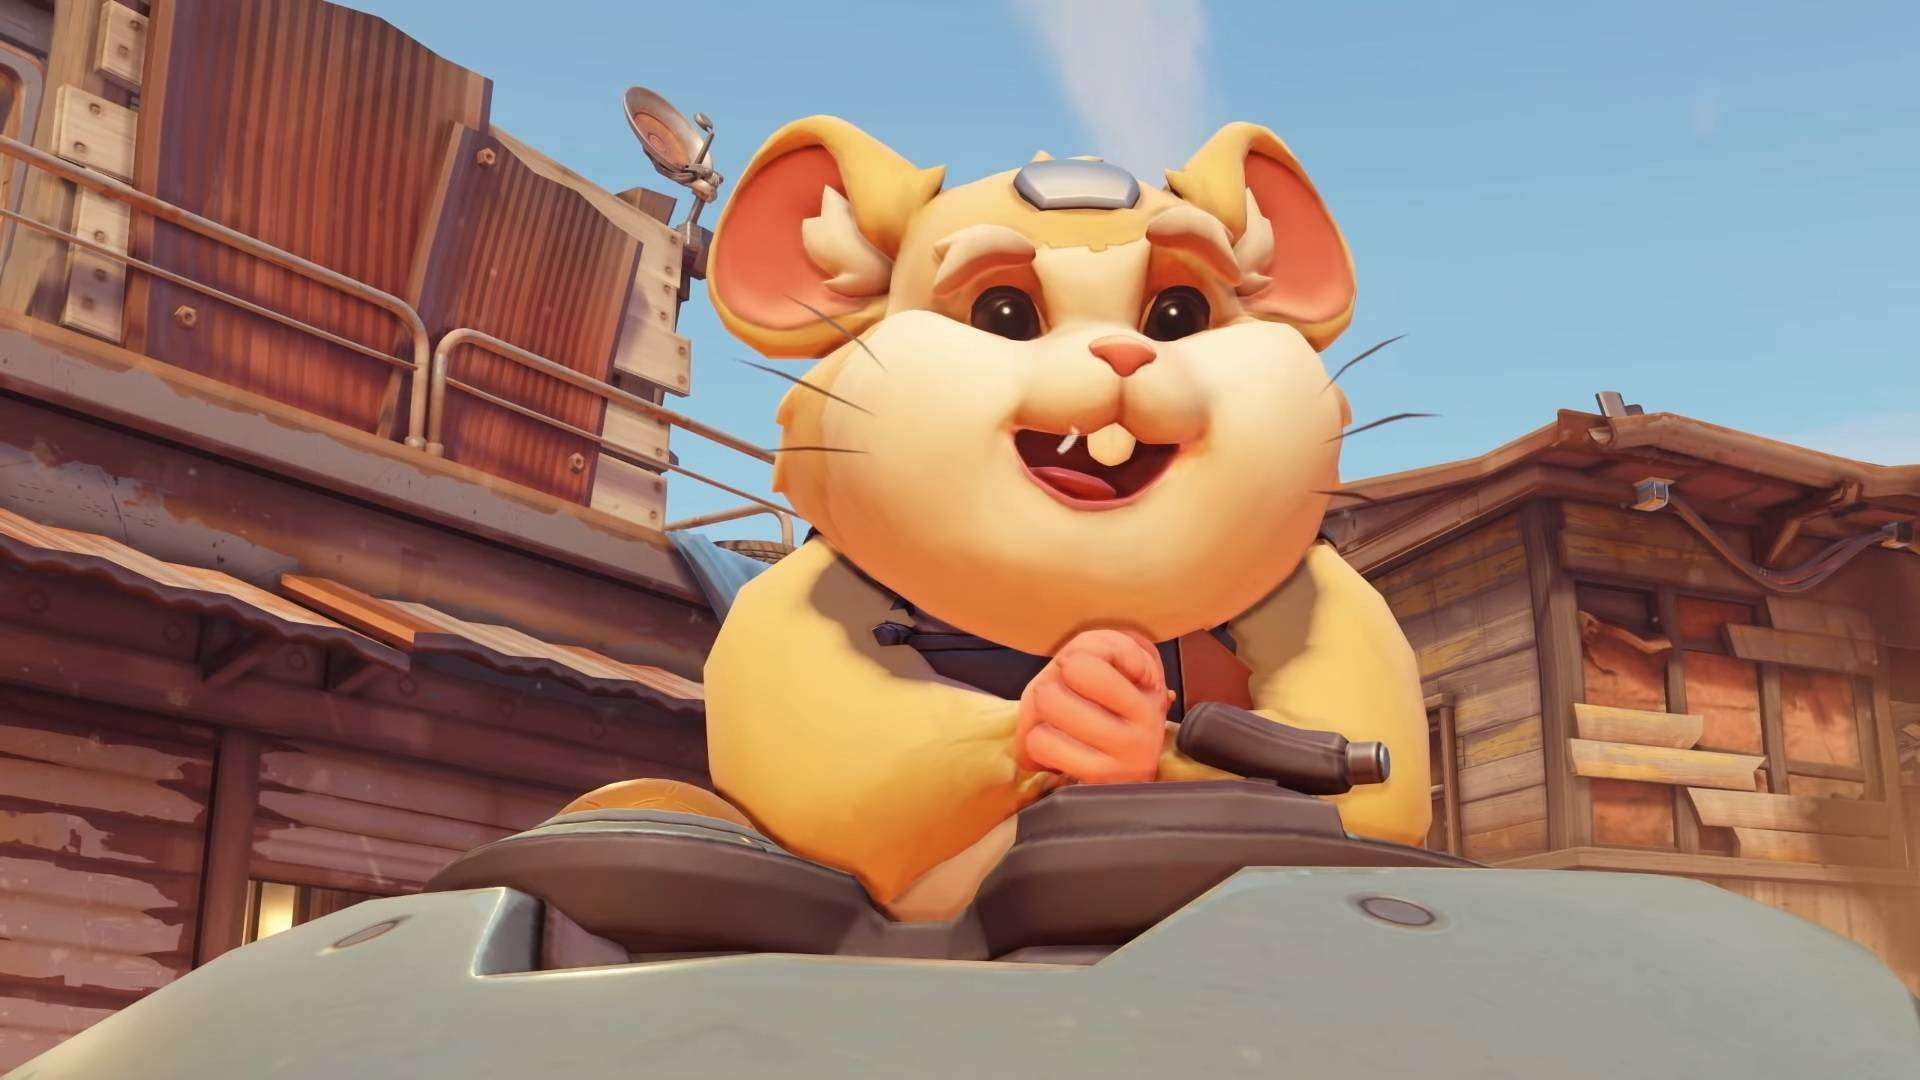 Overwatch Wrecking Ball smiling